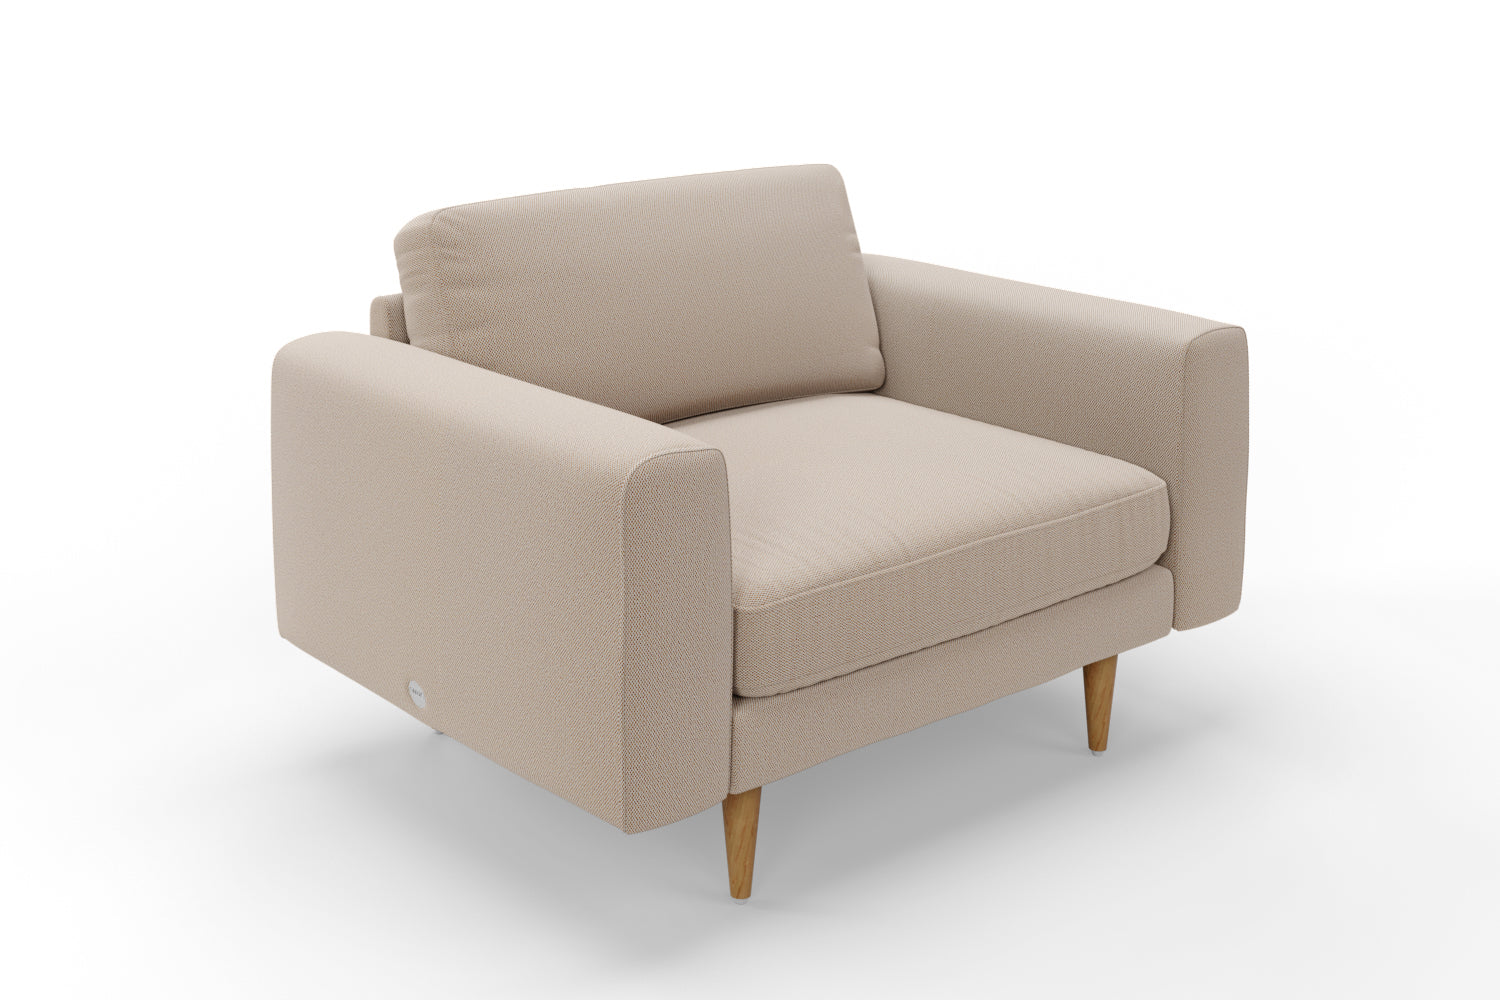 SNUG | The Big Chill 1.5 Seater Snuggler in Oatmeal